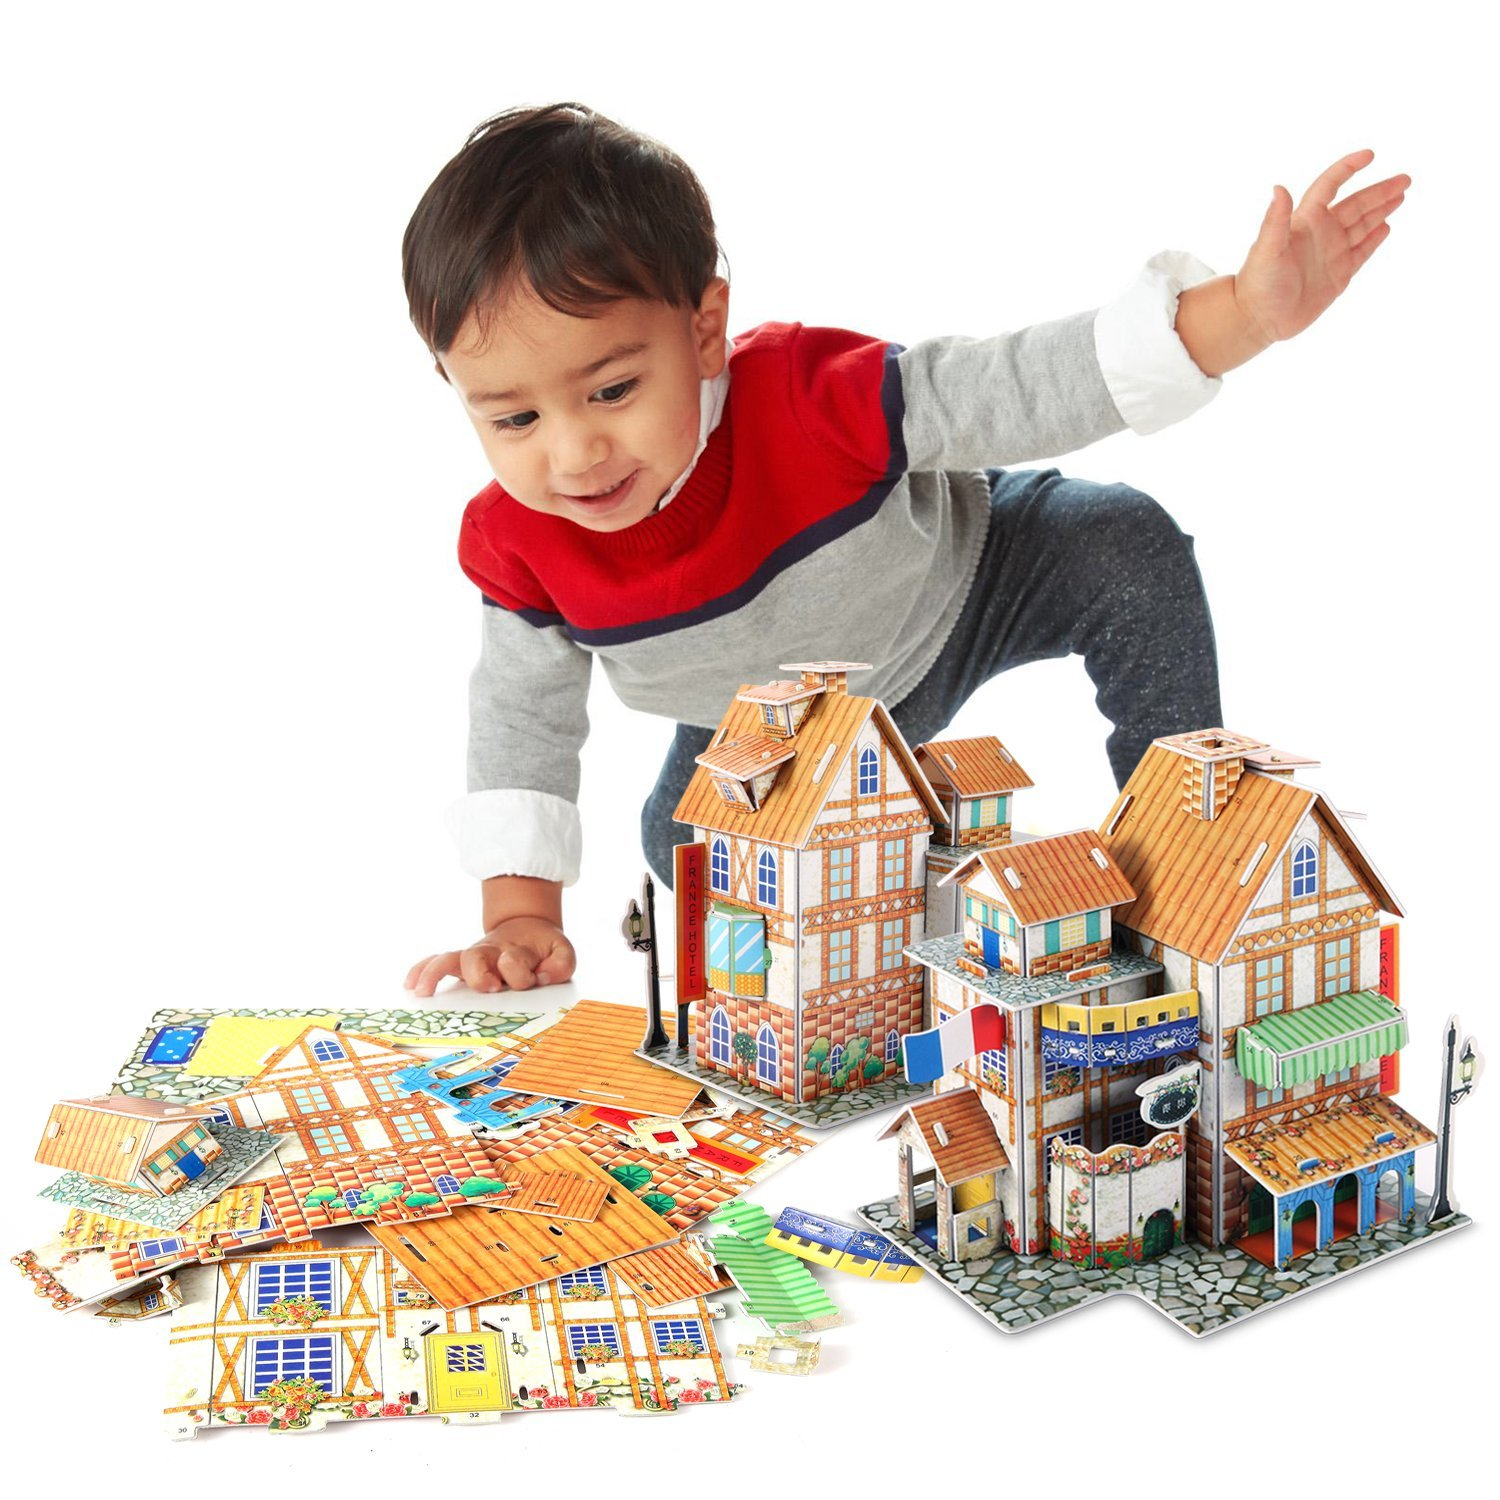 3D Puzzle Jigsaw Educational Toys Only $6.99 After Coupon Code!